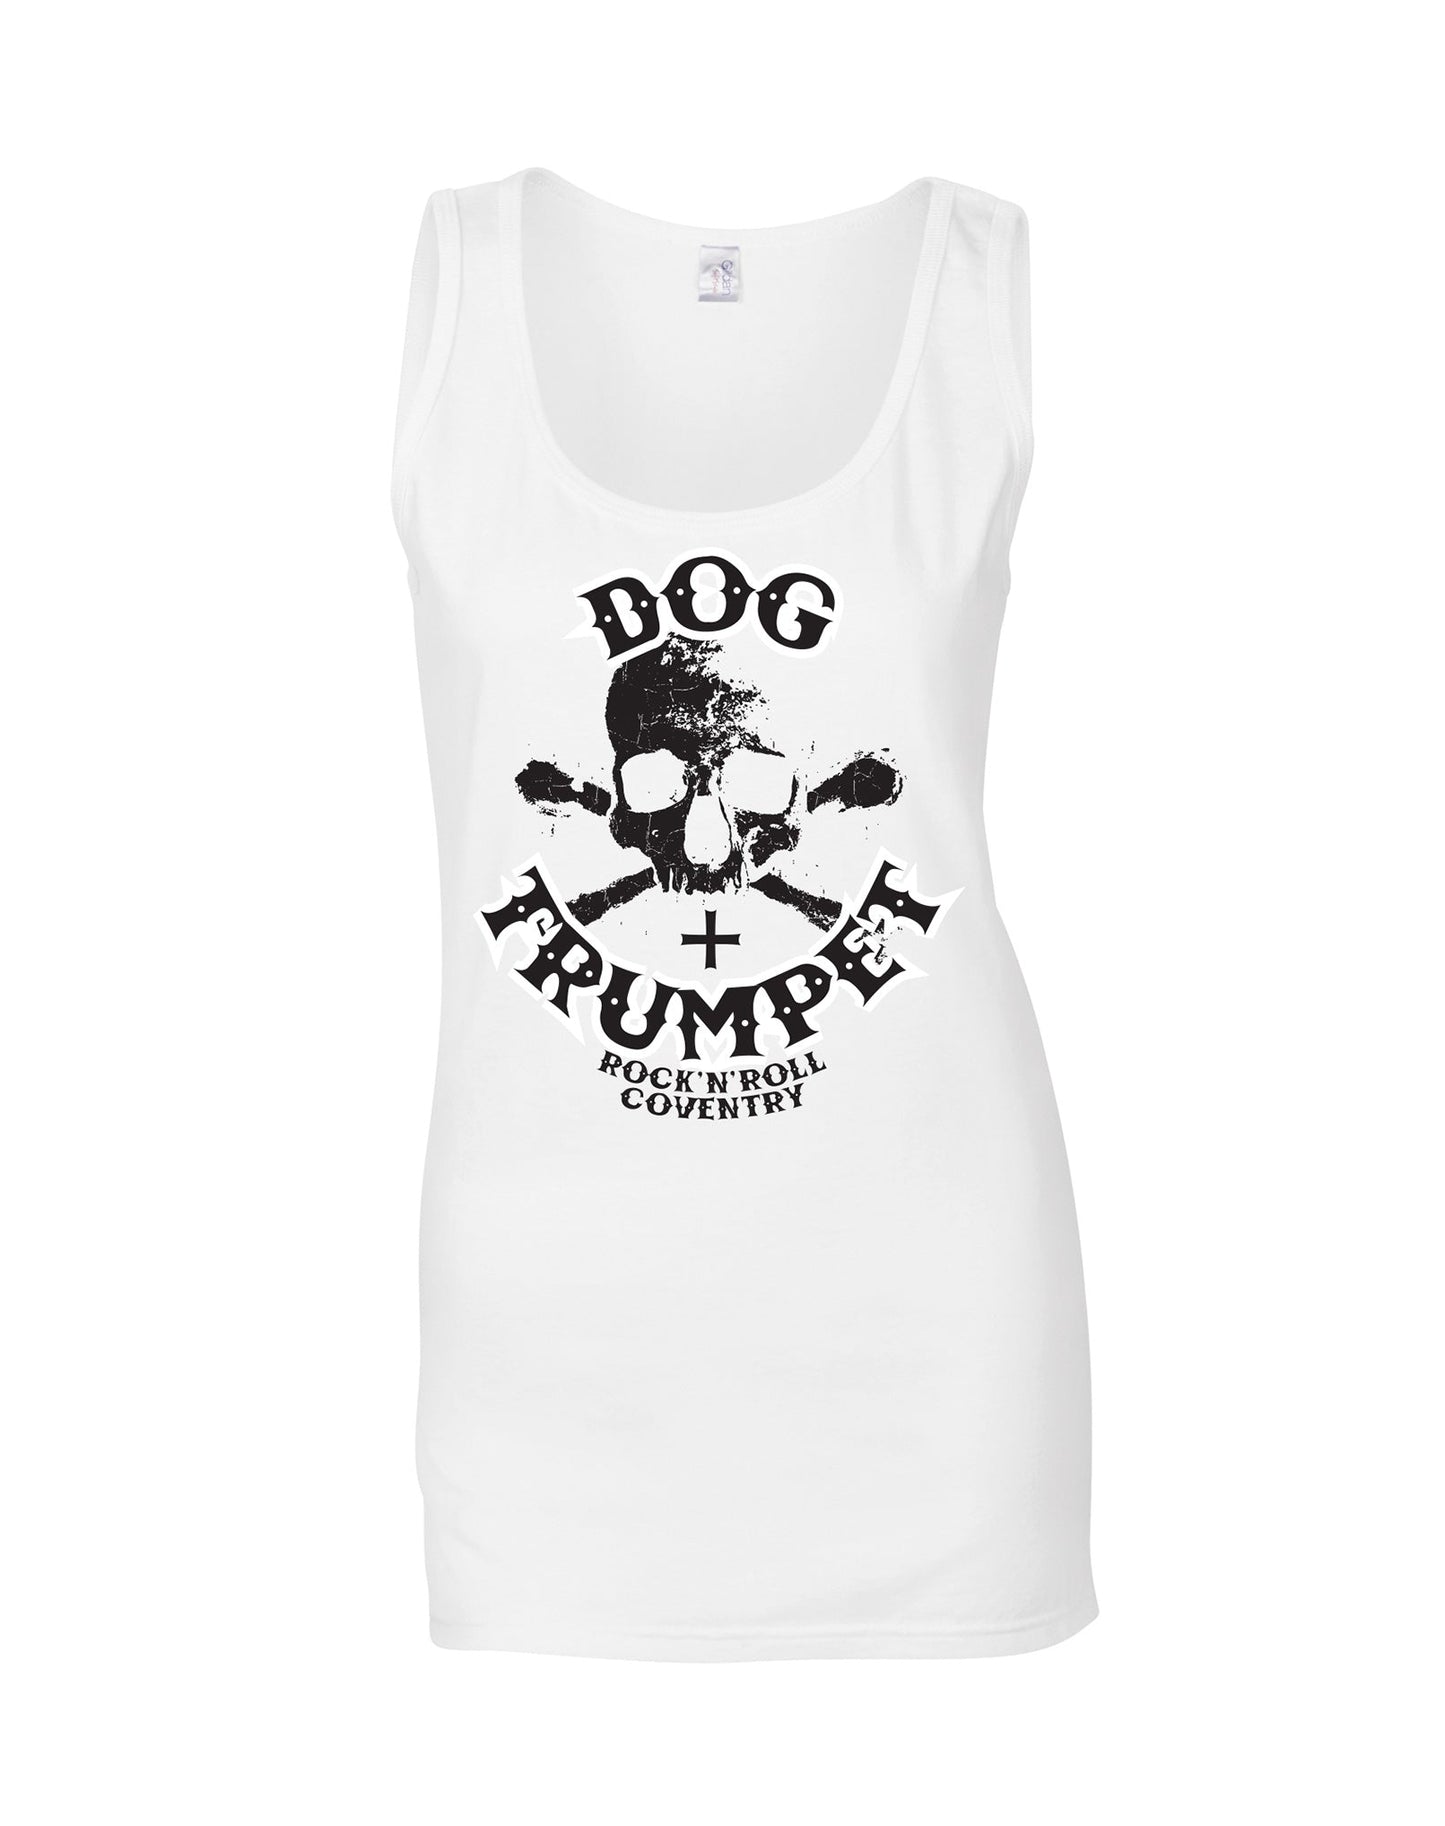 Dog & Trumpet (with skull) ladies fit vest - various colours - Dirty Stop Outs